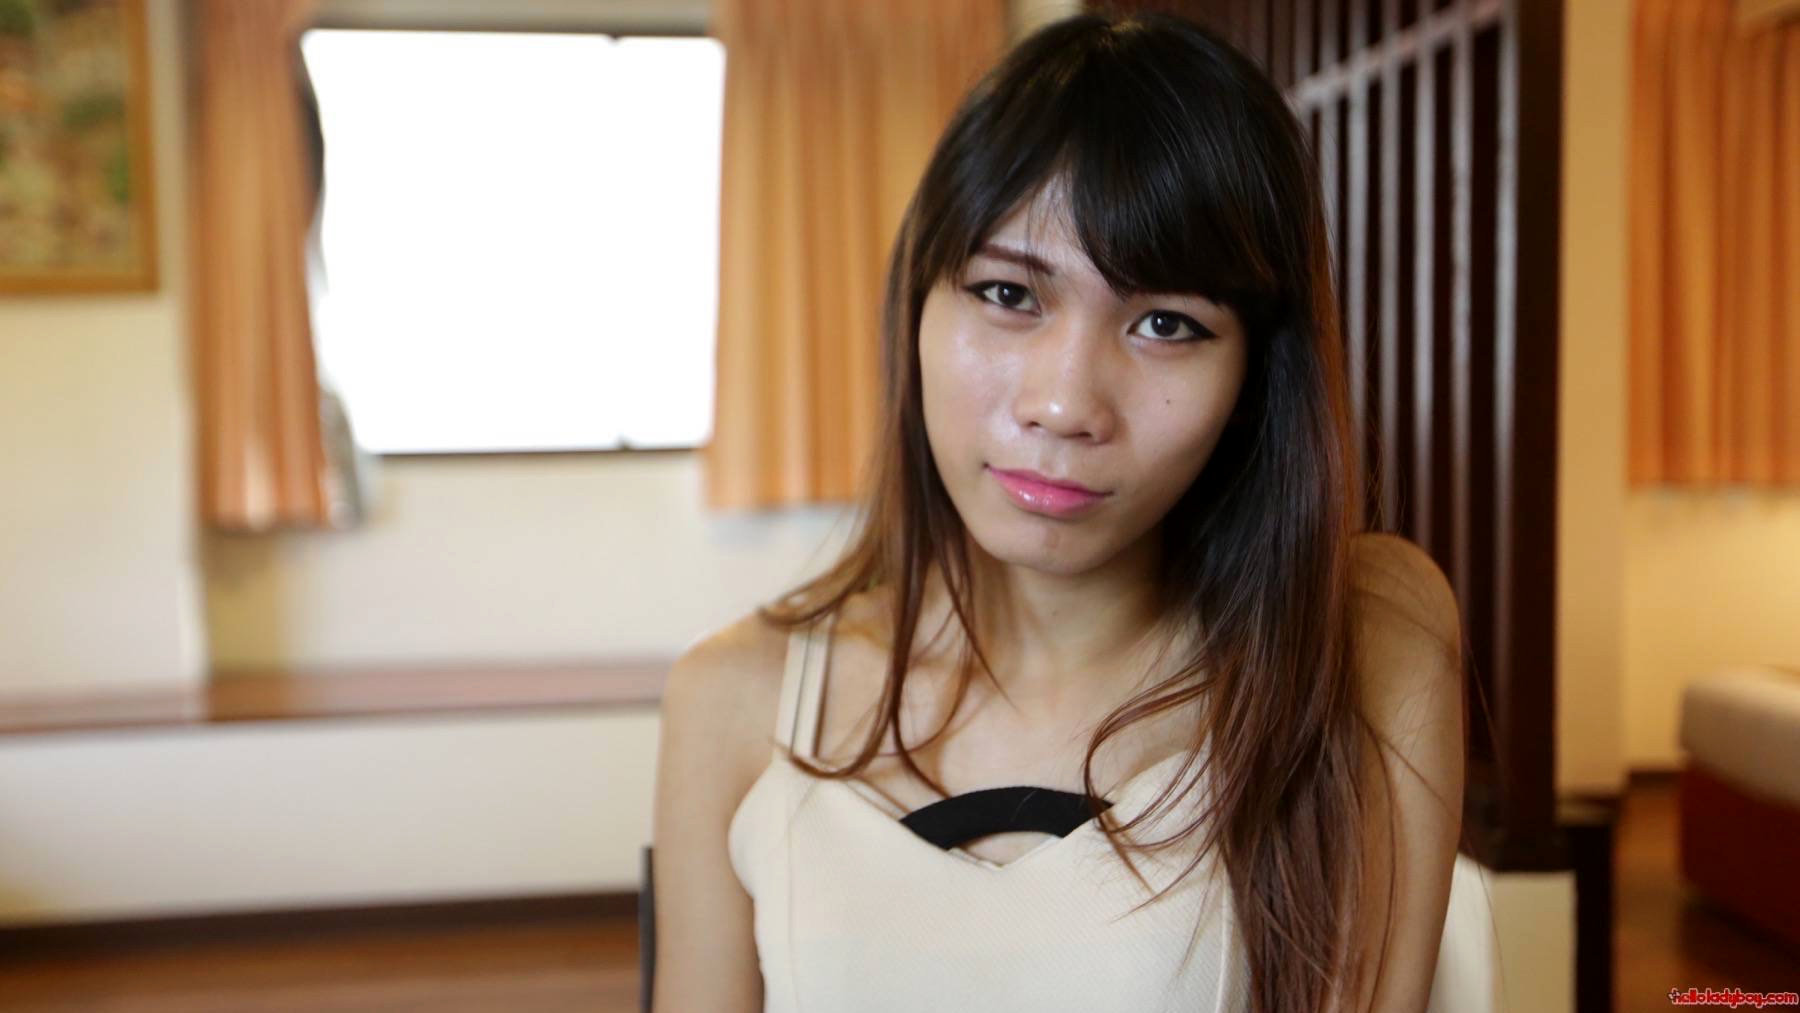 19 Year Old Naughty Asian Tranny Does A Striptease For White Tourist